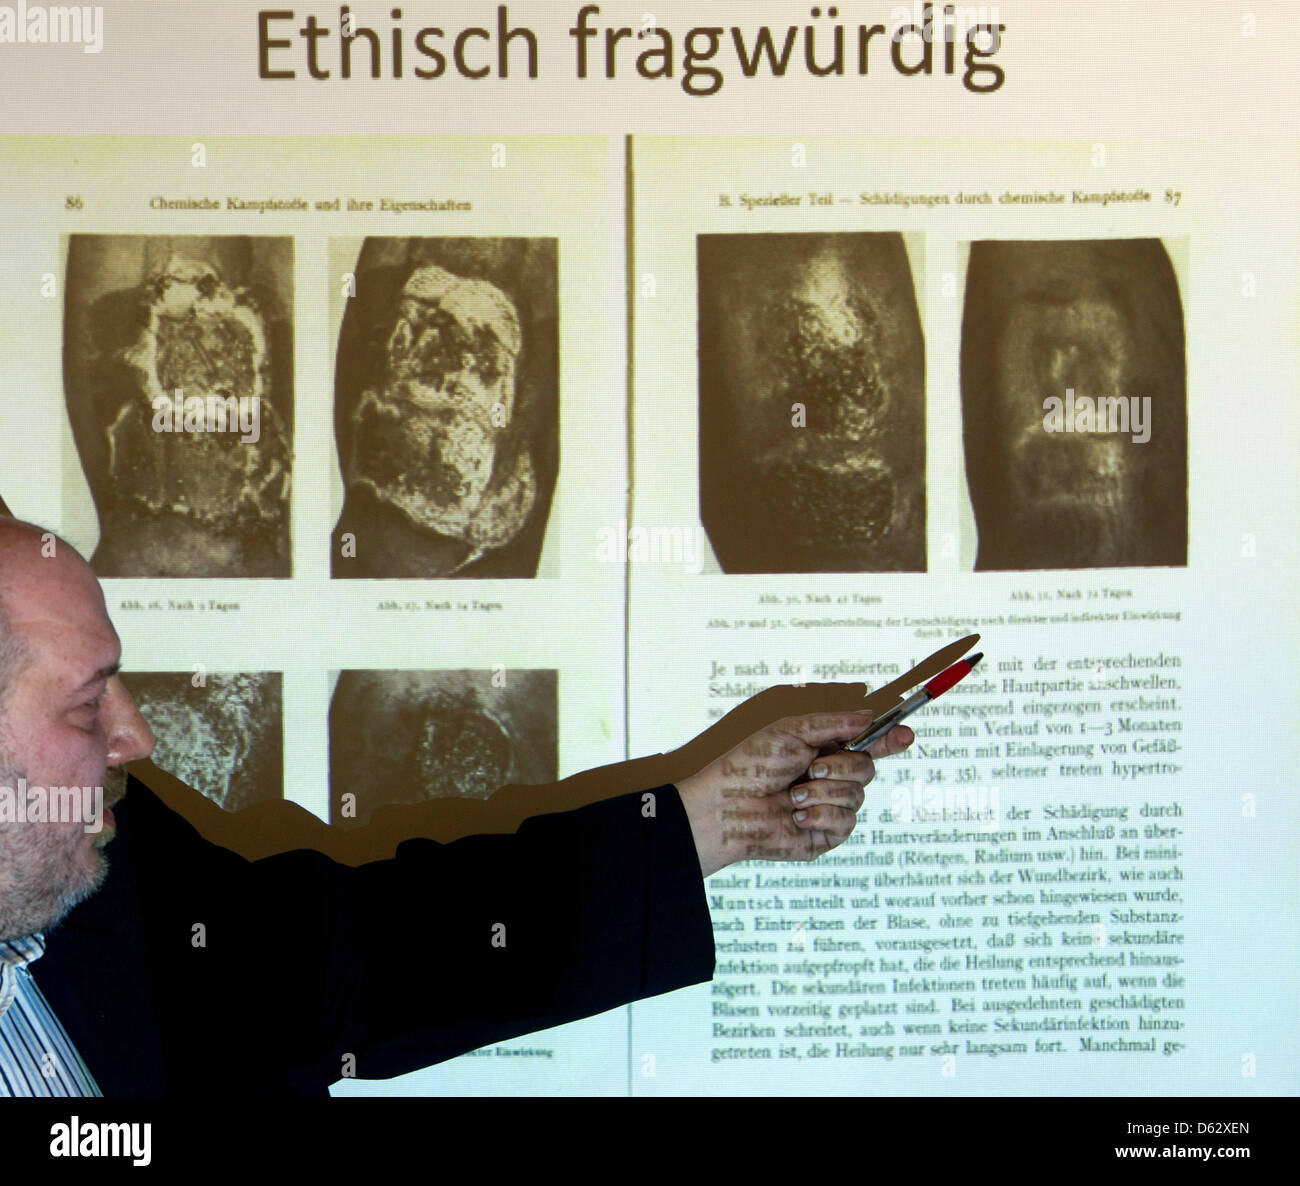 Henrik Eberle, historian at Martin Luther University Halle-Wittenberg, points to historic photos from experiments with chemical weapons in Greifswald, Germany, 11 April 2013. The most current research by historians shows that chemical weapons and their effects were researched and tested at Greifswald University under chemist Gerhart Jander and medical doctor Wilhelm Richter. Some of the experiments were carried out on humans. The university is researching the relationship its researchers had with the Nazi regime. Photo: STEFAN SAUER Stock Photo